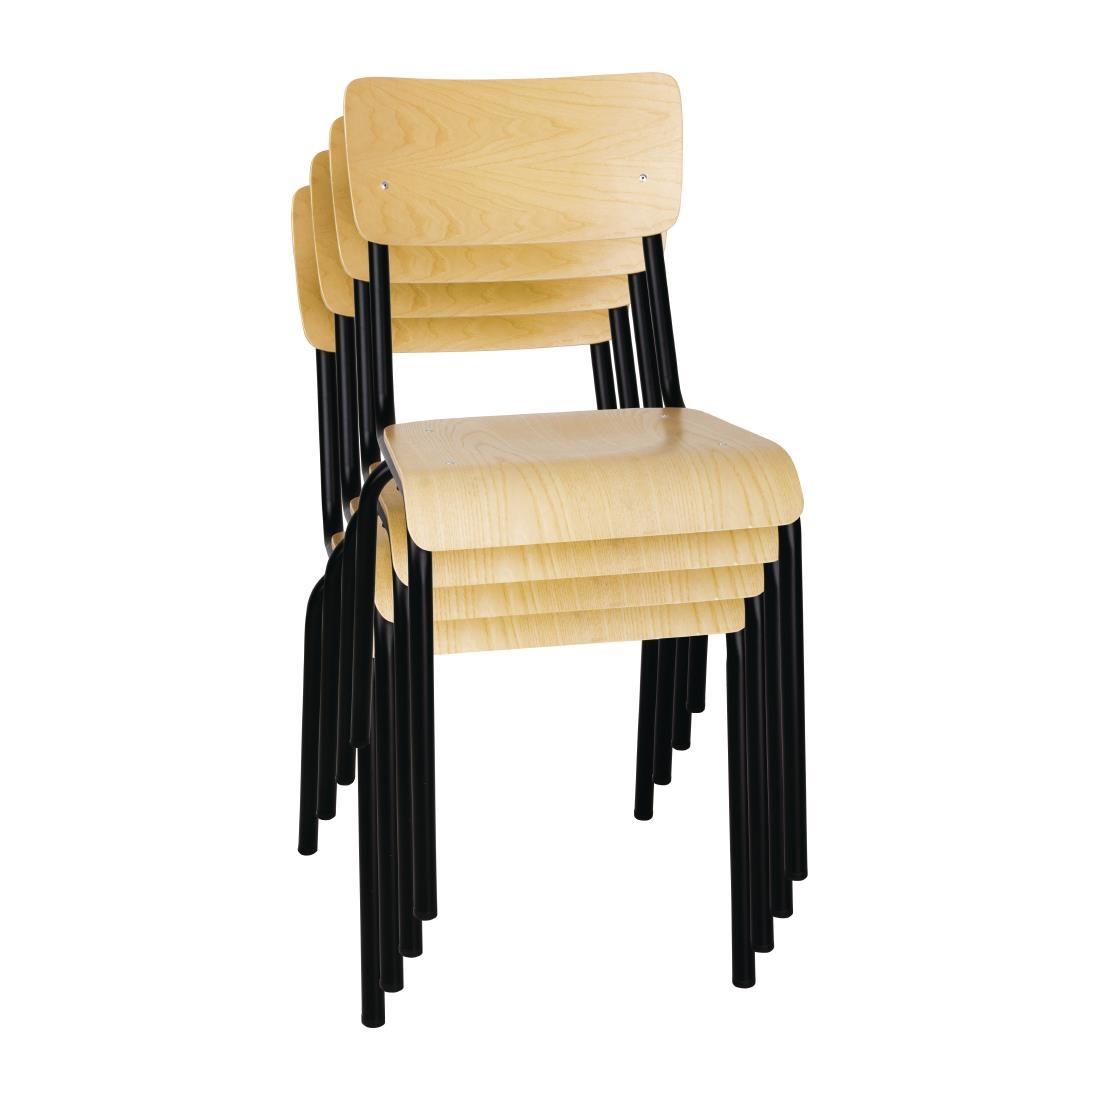 Bolero Cantina Side Chairs with Wooden Seat Pad and Backrest Black (Pack of 4) - FB949  - 5